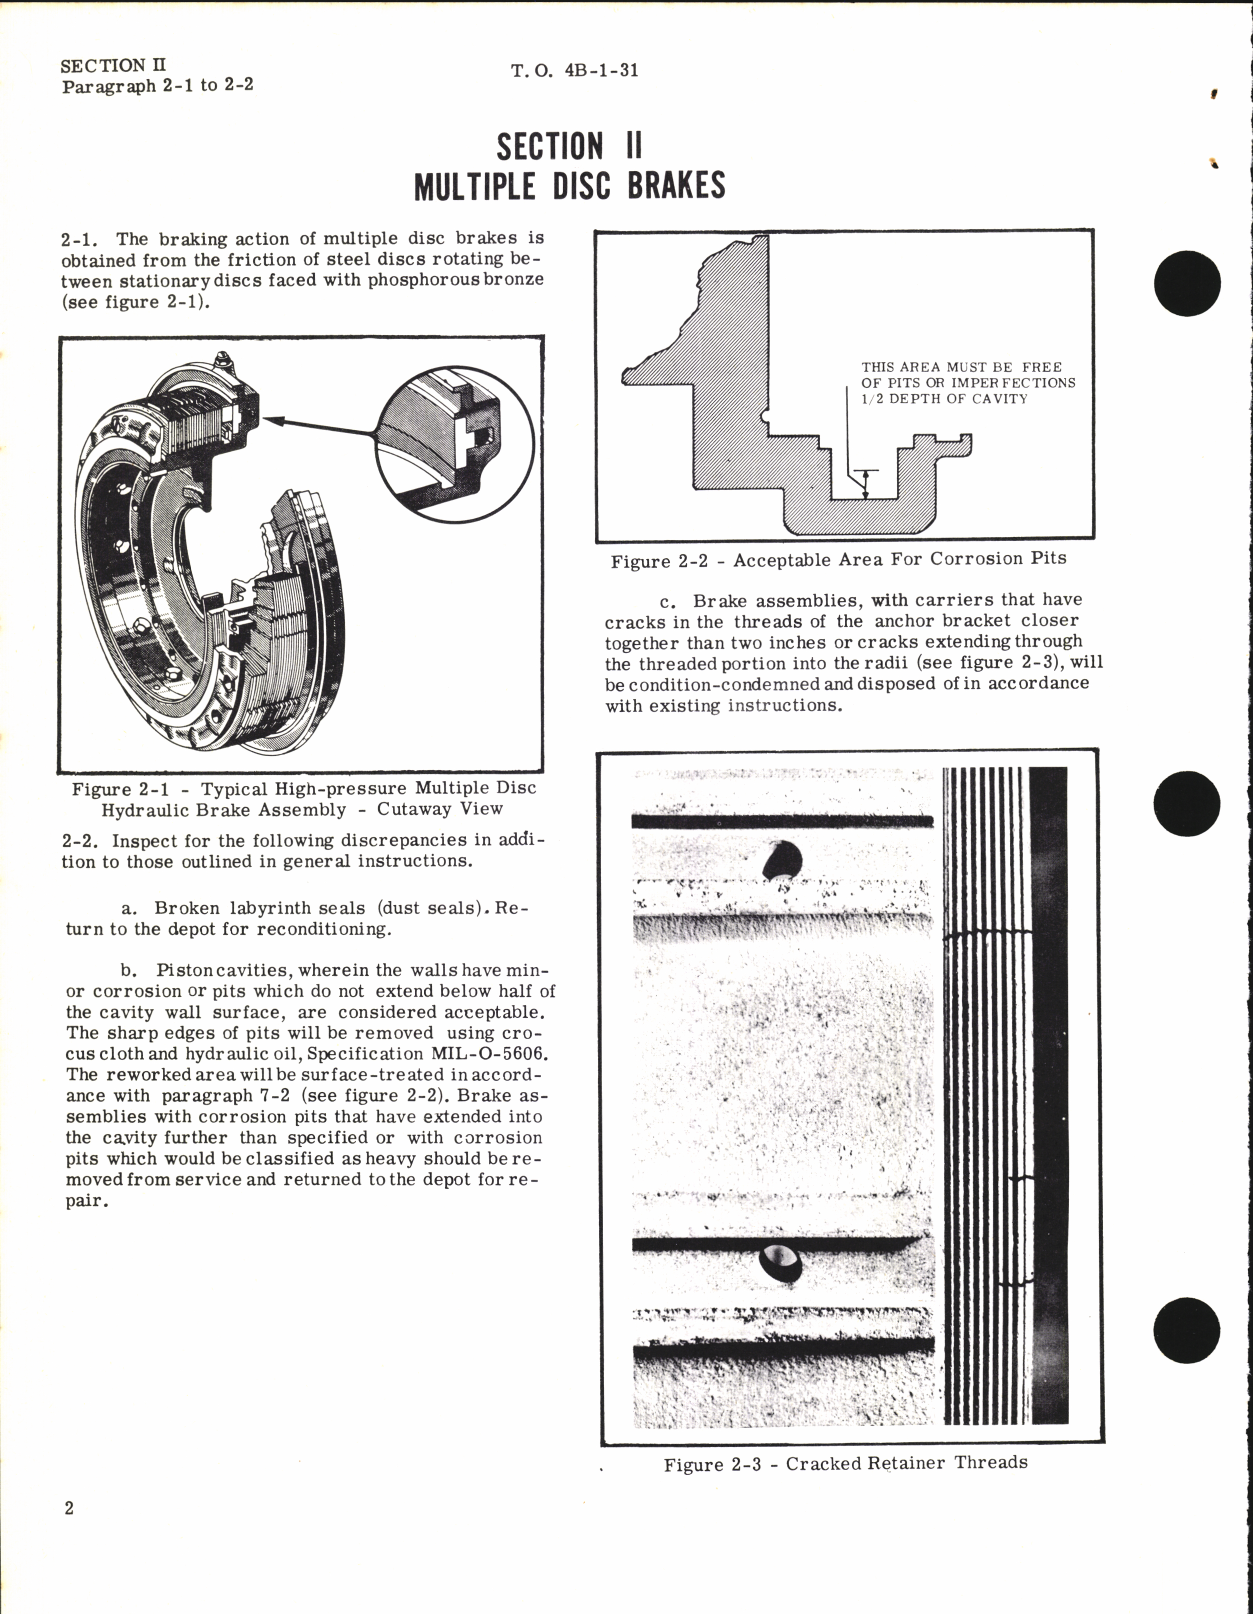 Sample page 6 from AirCorps Library document: Service and Maintenance Instructions for All Aircraft Brakes